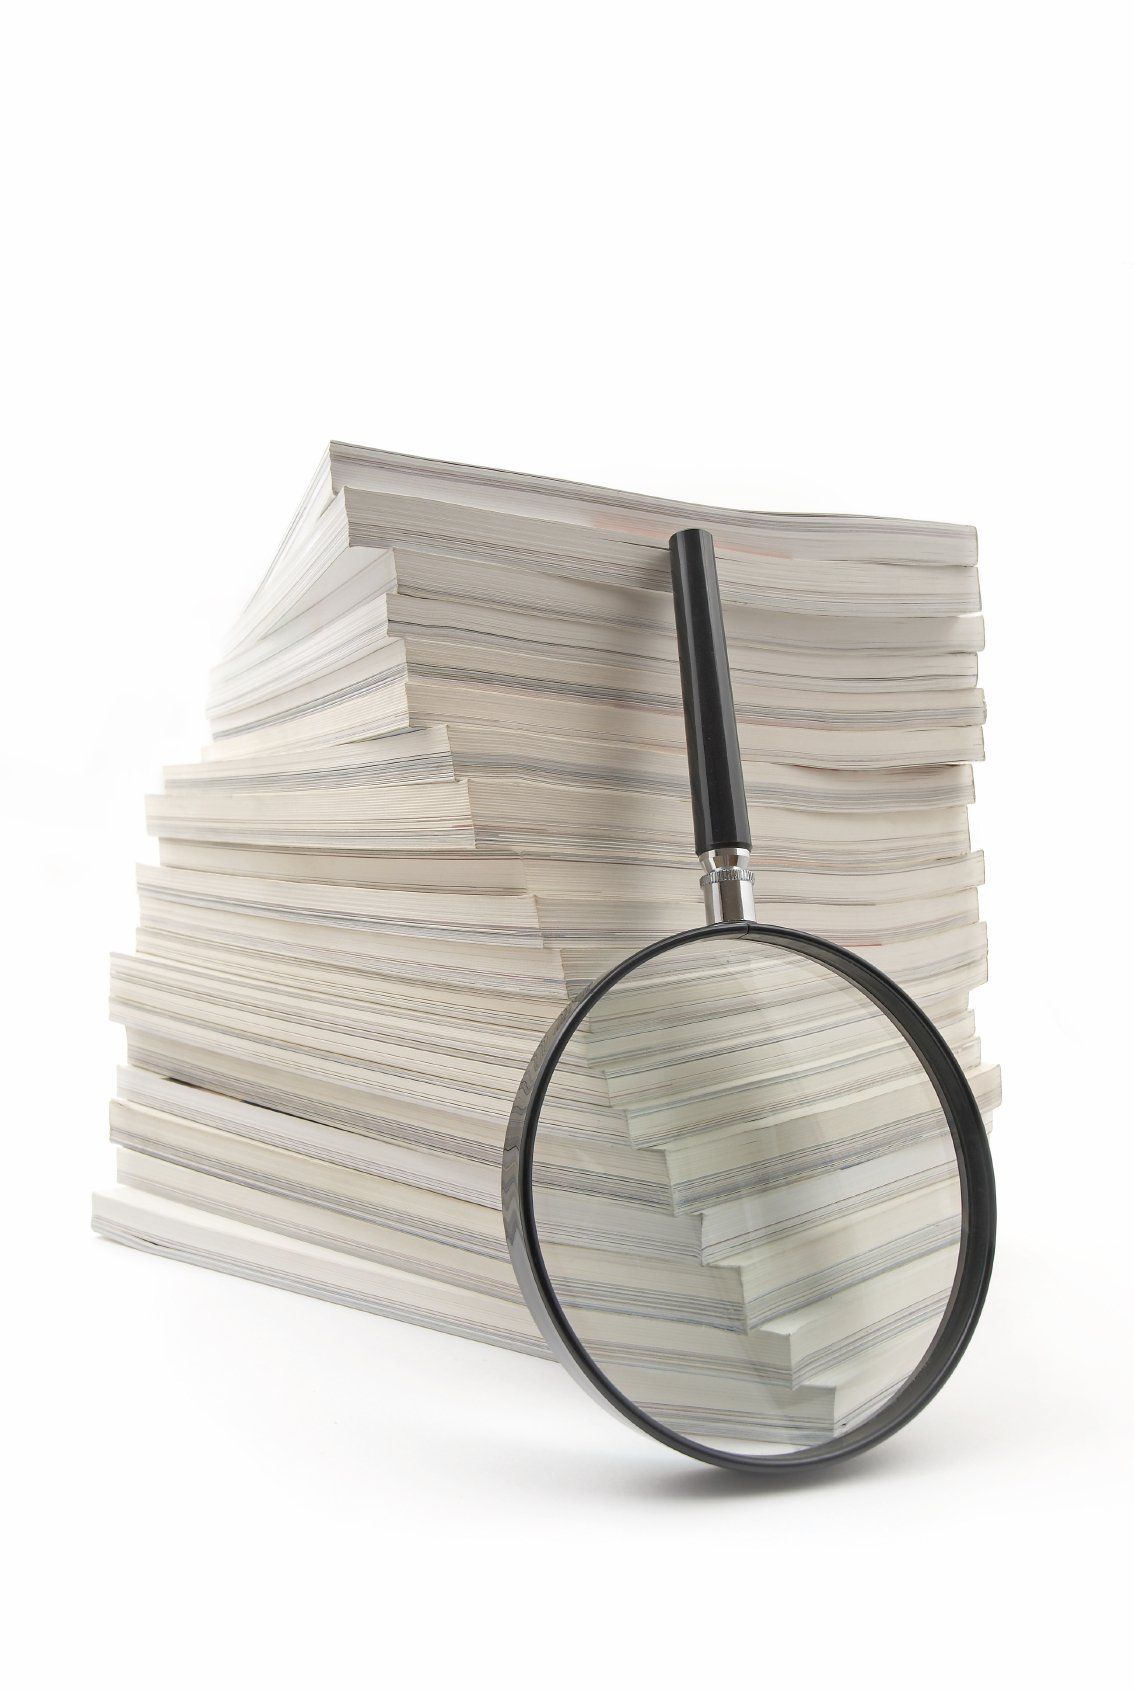 A stack of papers with a large black magnifying glass next to it.